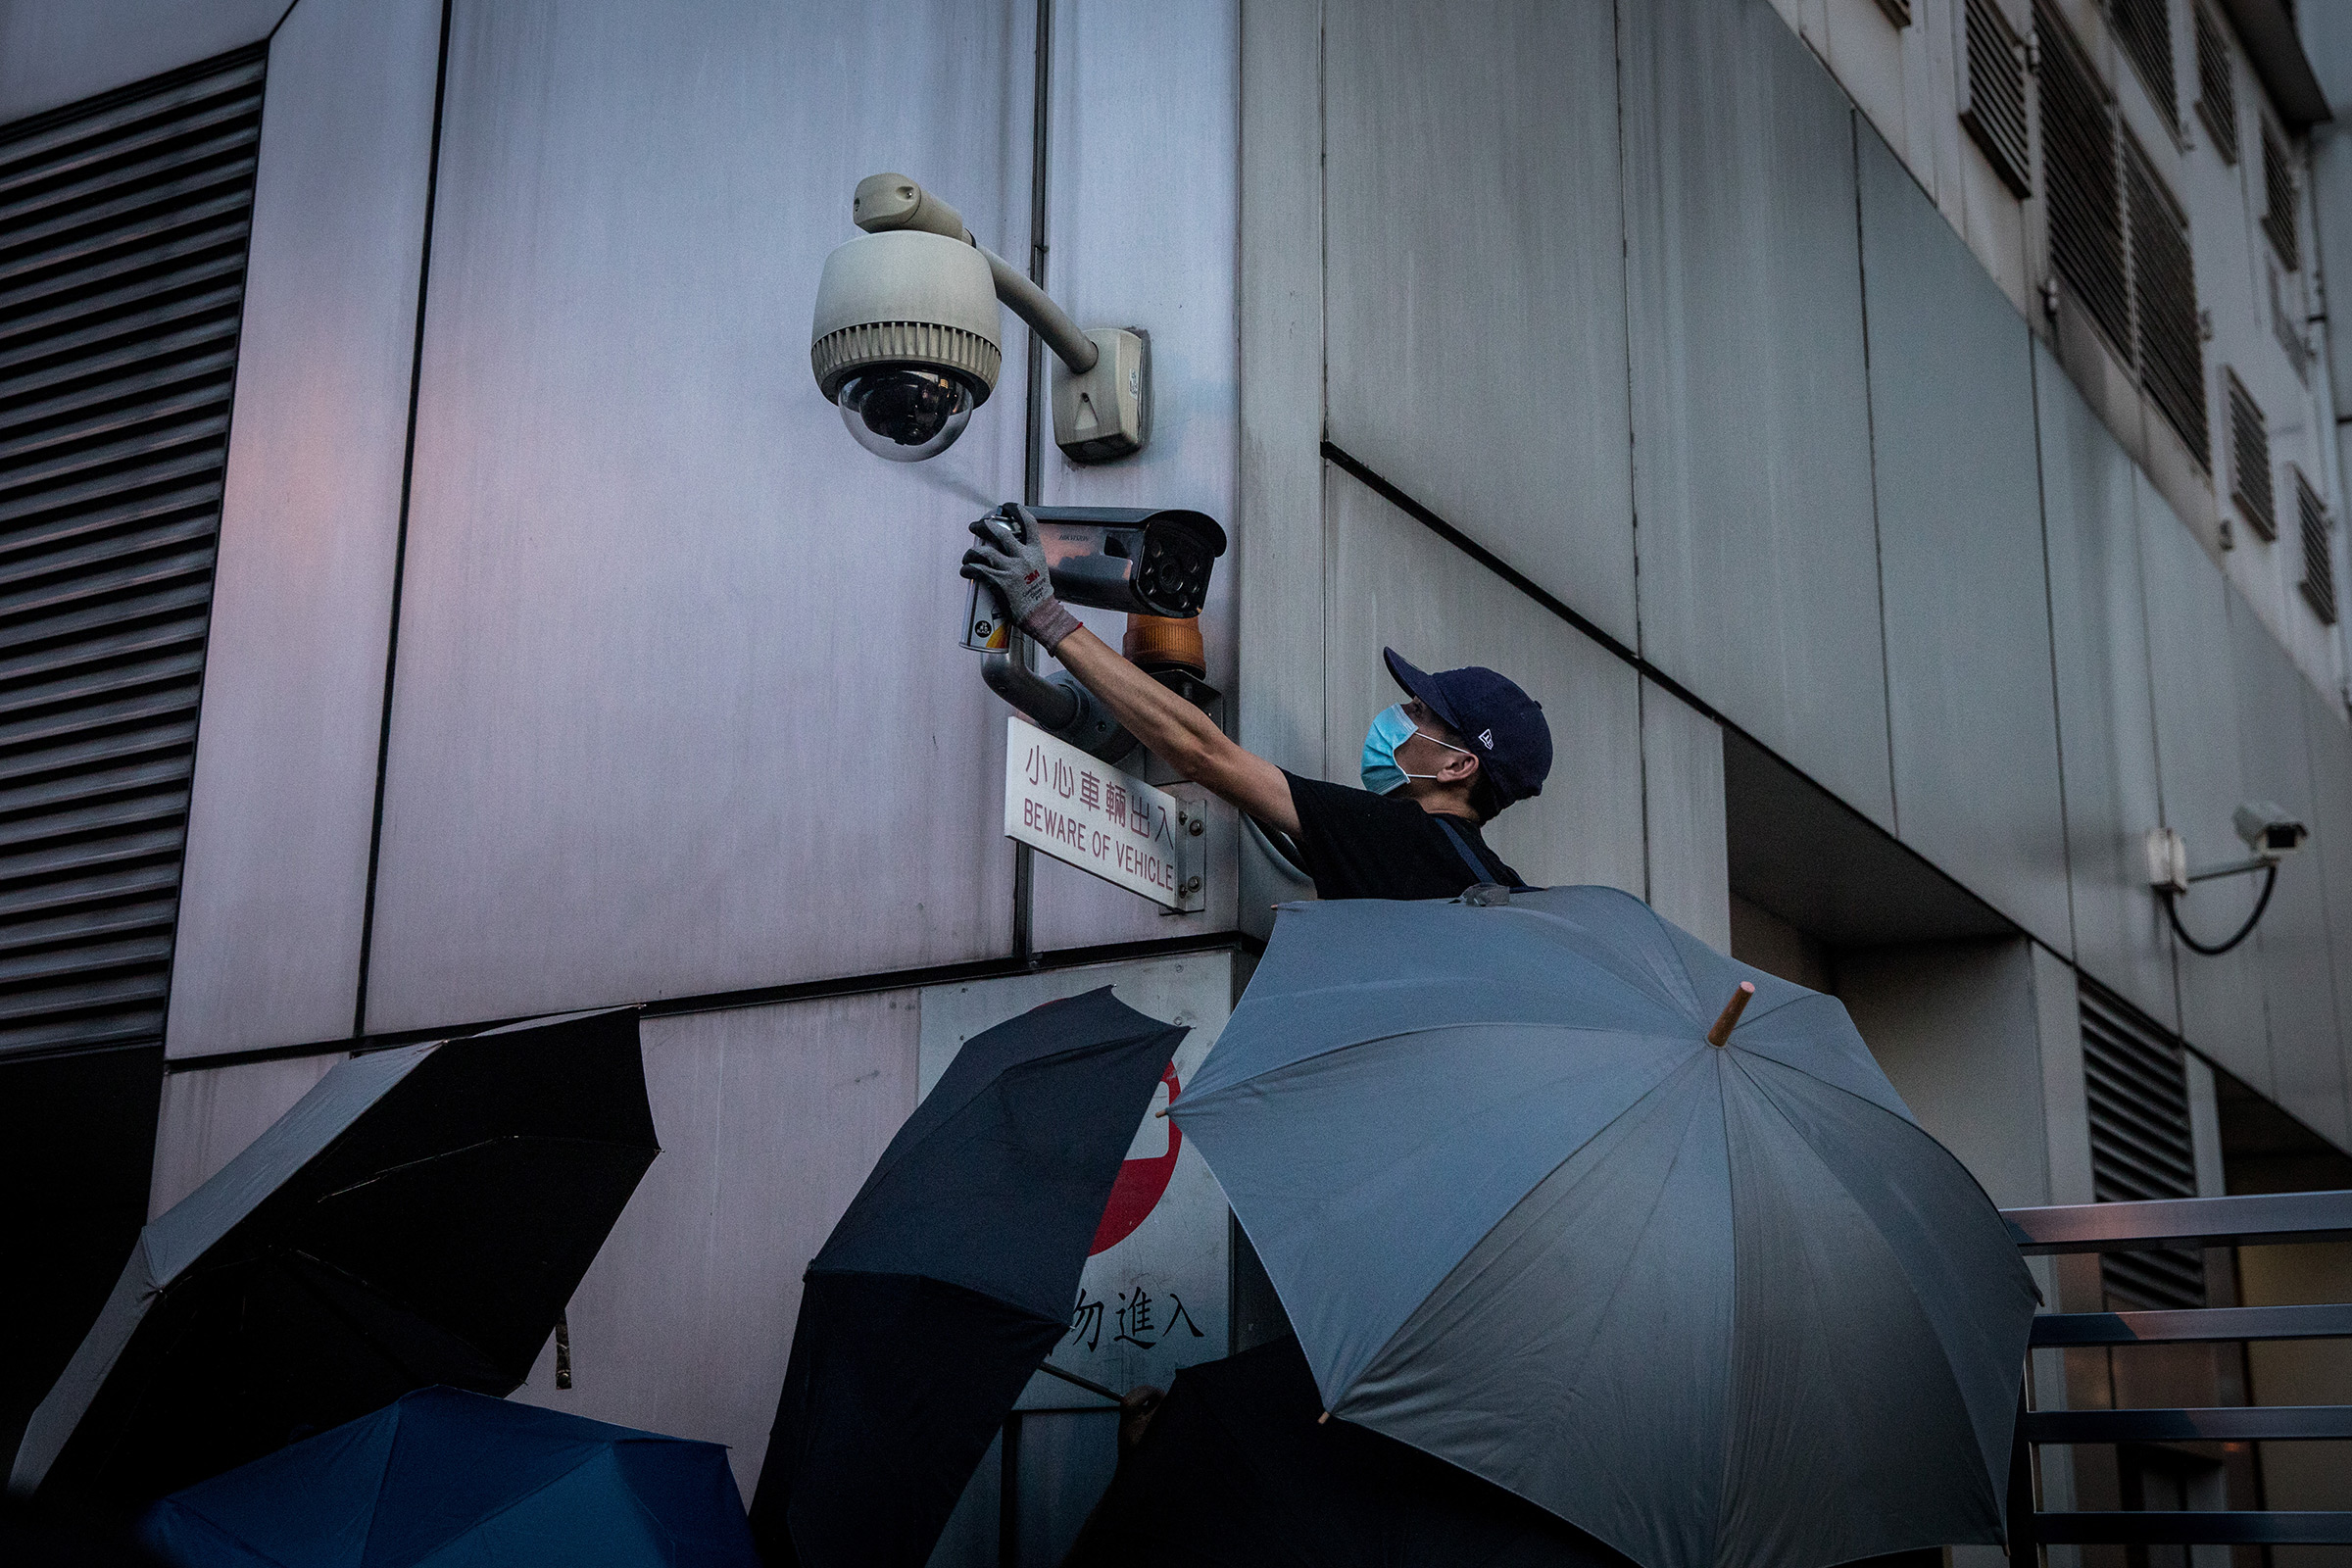 A protester covers a camera outside a government office in Hong Kong in July (Chris McGrath—Getty Images)